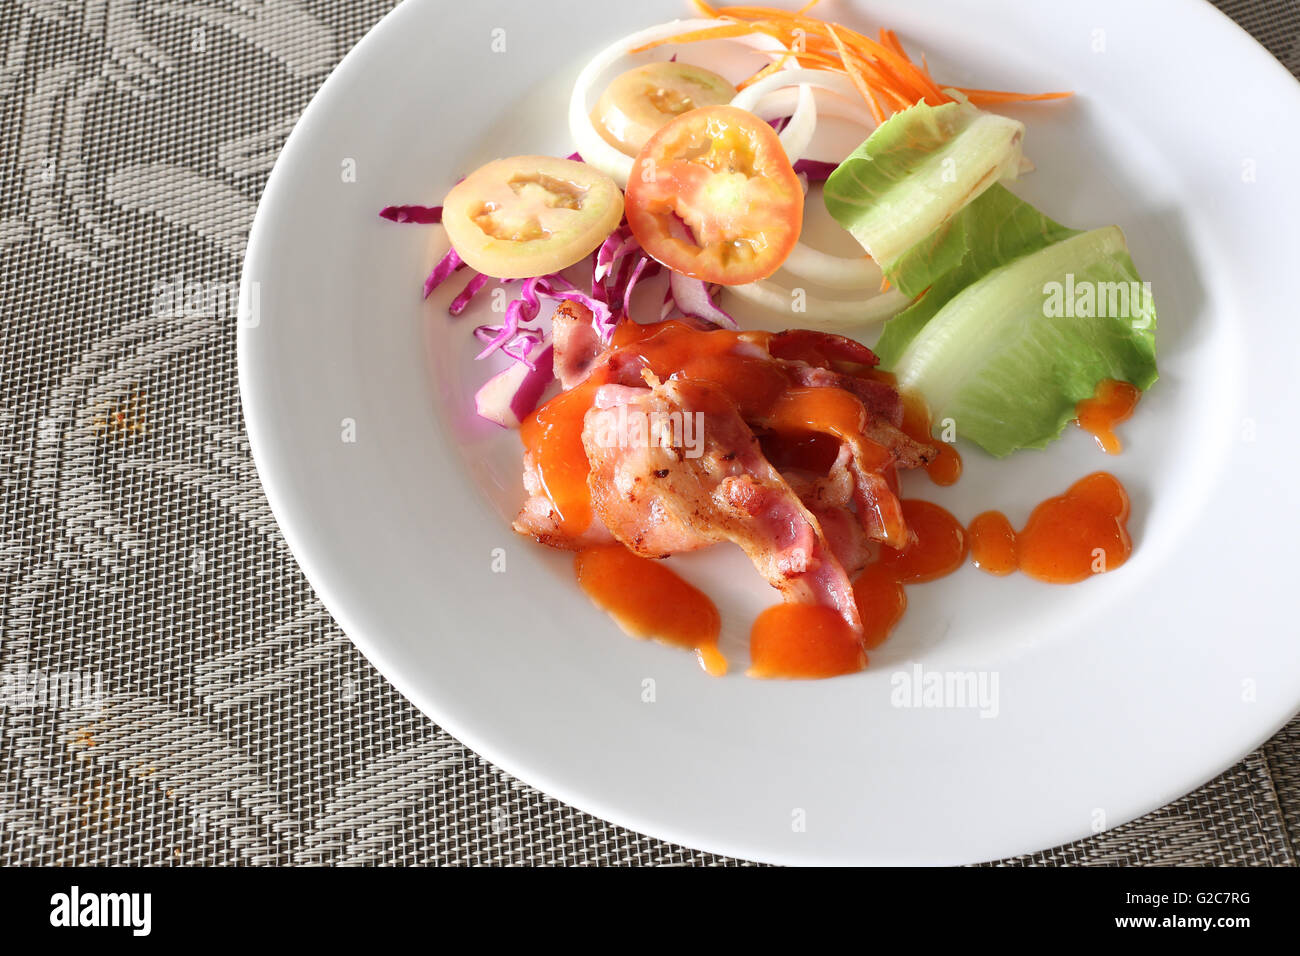 Vegetable salads and spicy sauce in a white dish on food table. Stock Photo